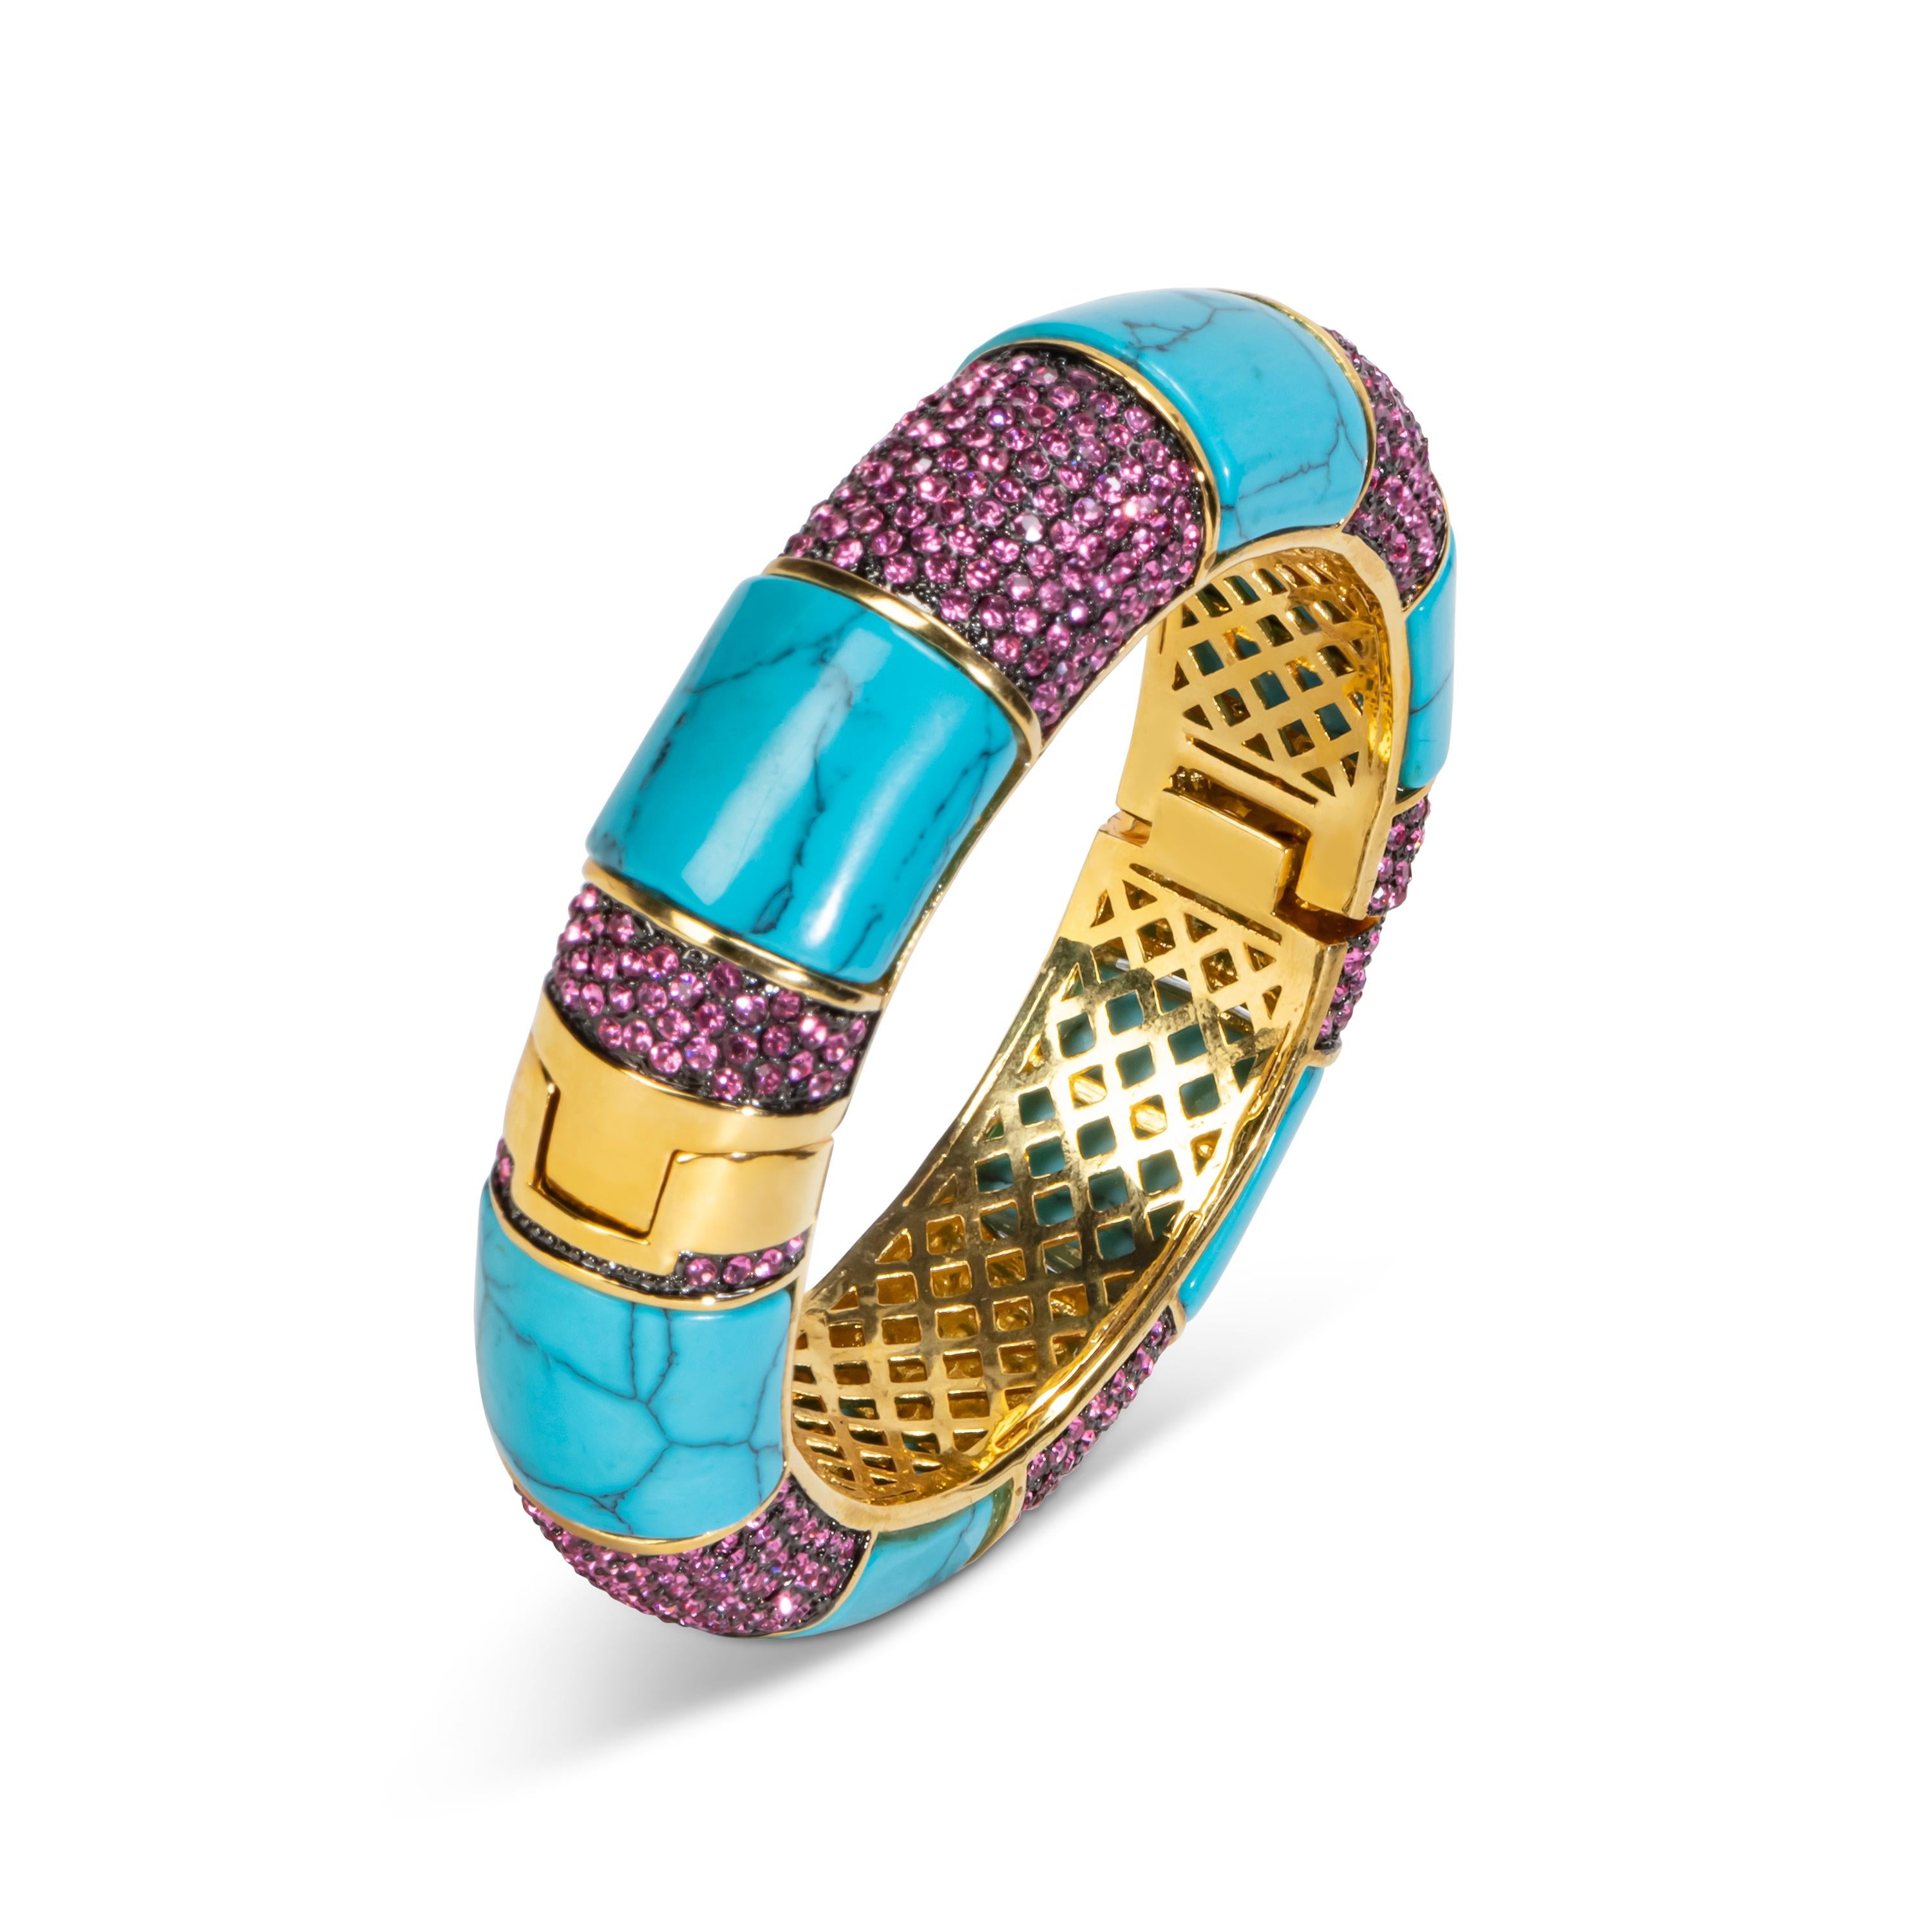 Bochic Ikon Bijoux Mughal cuff. 
Red crystals settings. 
Turquoise resin. 
Magnetic clasp  
8 inch diameter opening. 
Grill is gilded plating. 
Comes with a Bochic Velvet pouch. 